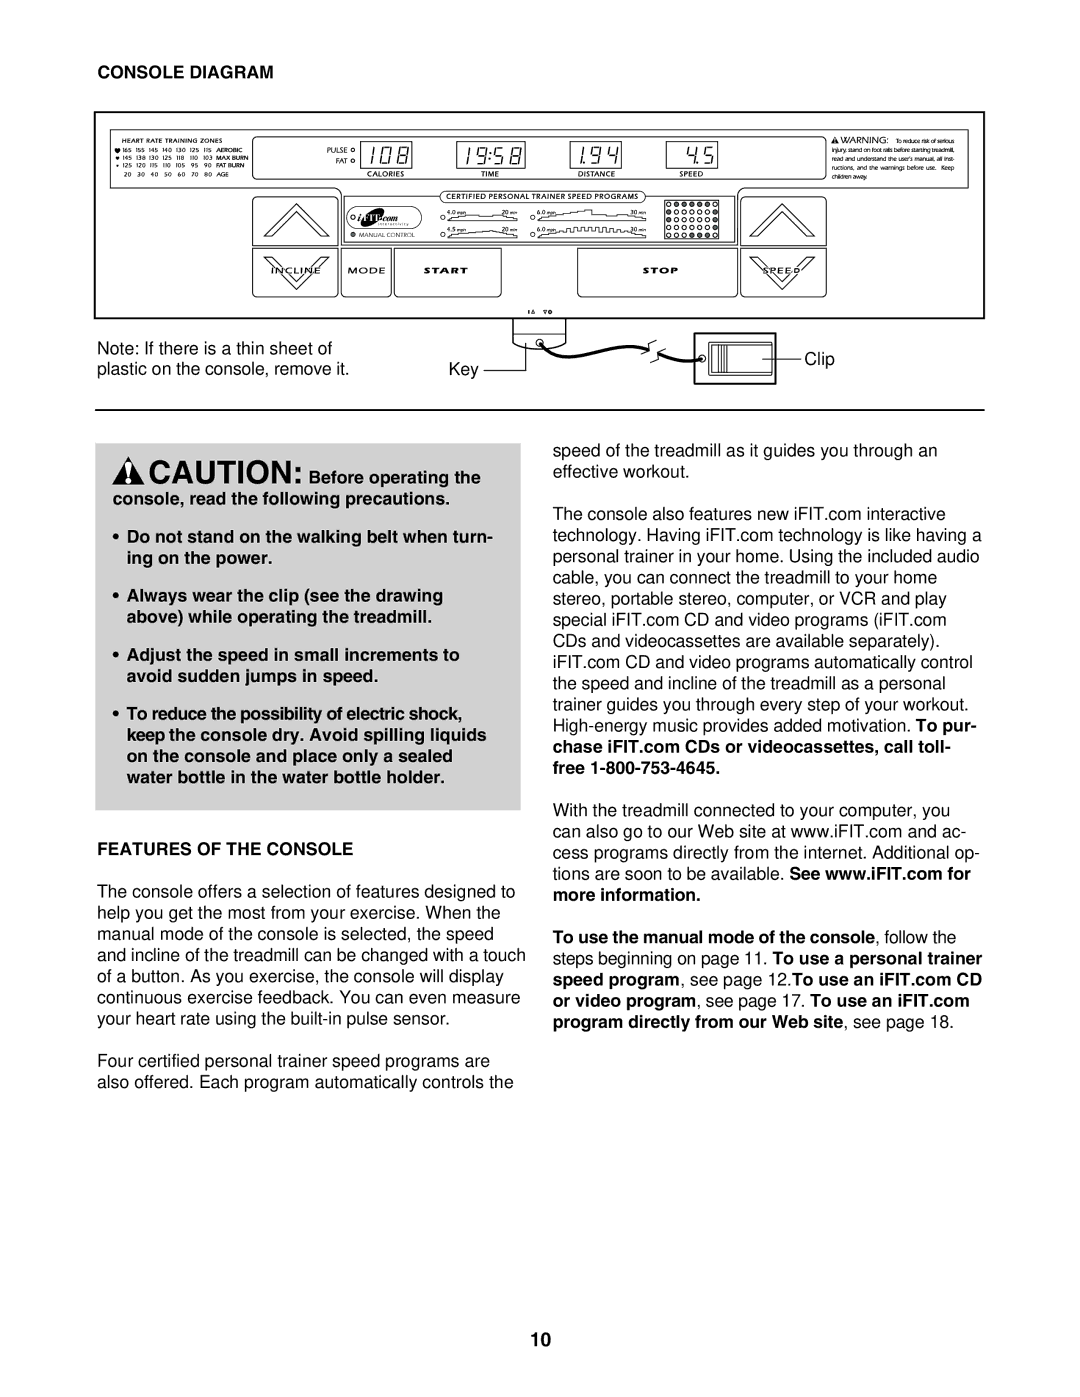 Image IMTL39526 user manual Console Diagram, Features of the Console 